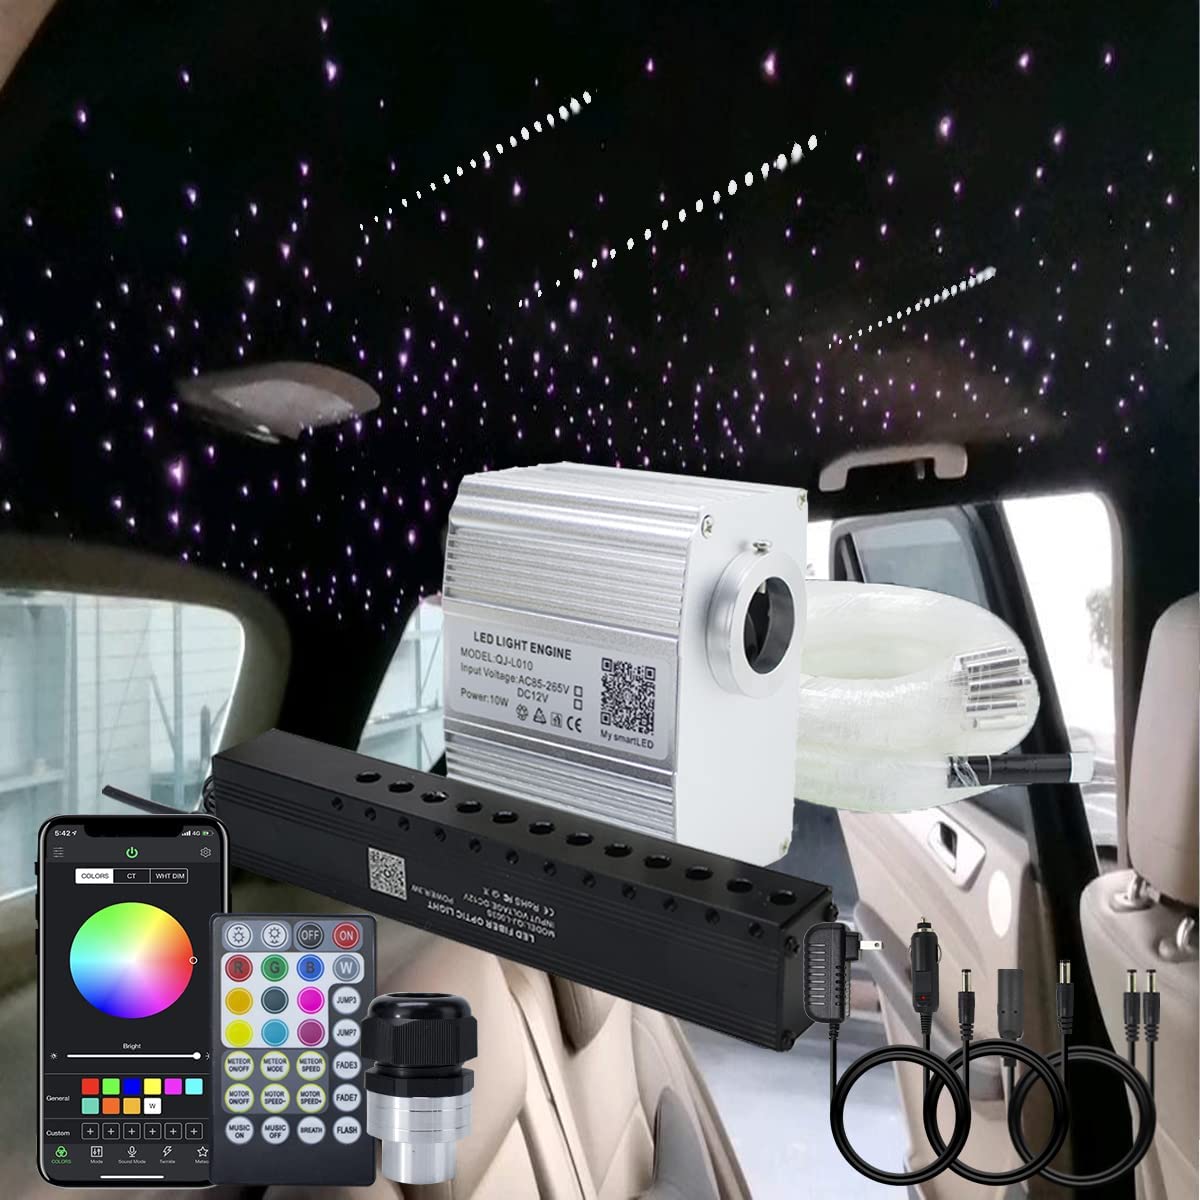 10W RGBW Twinkle Shooting Star Headliner Kit (Star Ceiling +Shooting Stars) for Car Truck, Yacht Boat & Home Theaters | SanliLED.shop